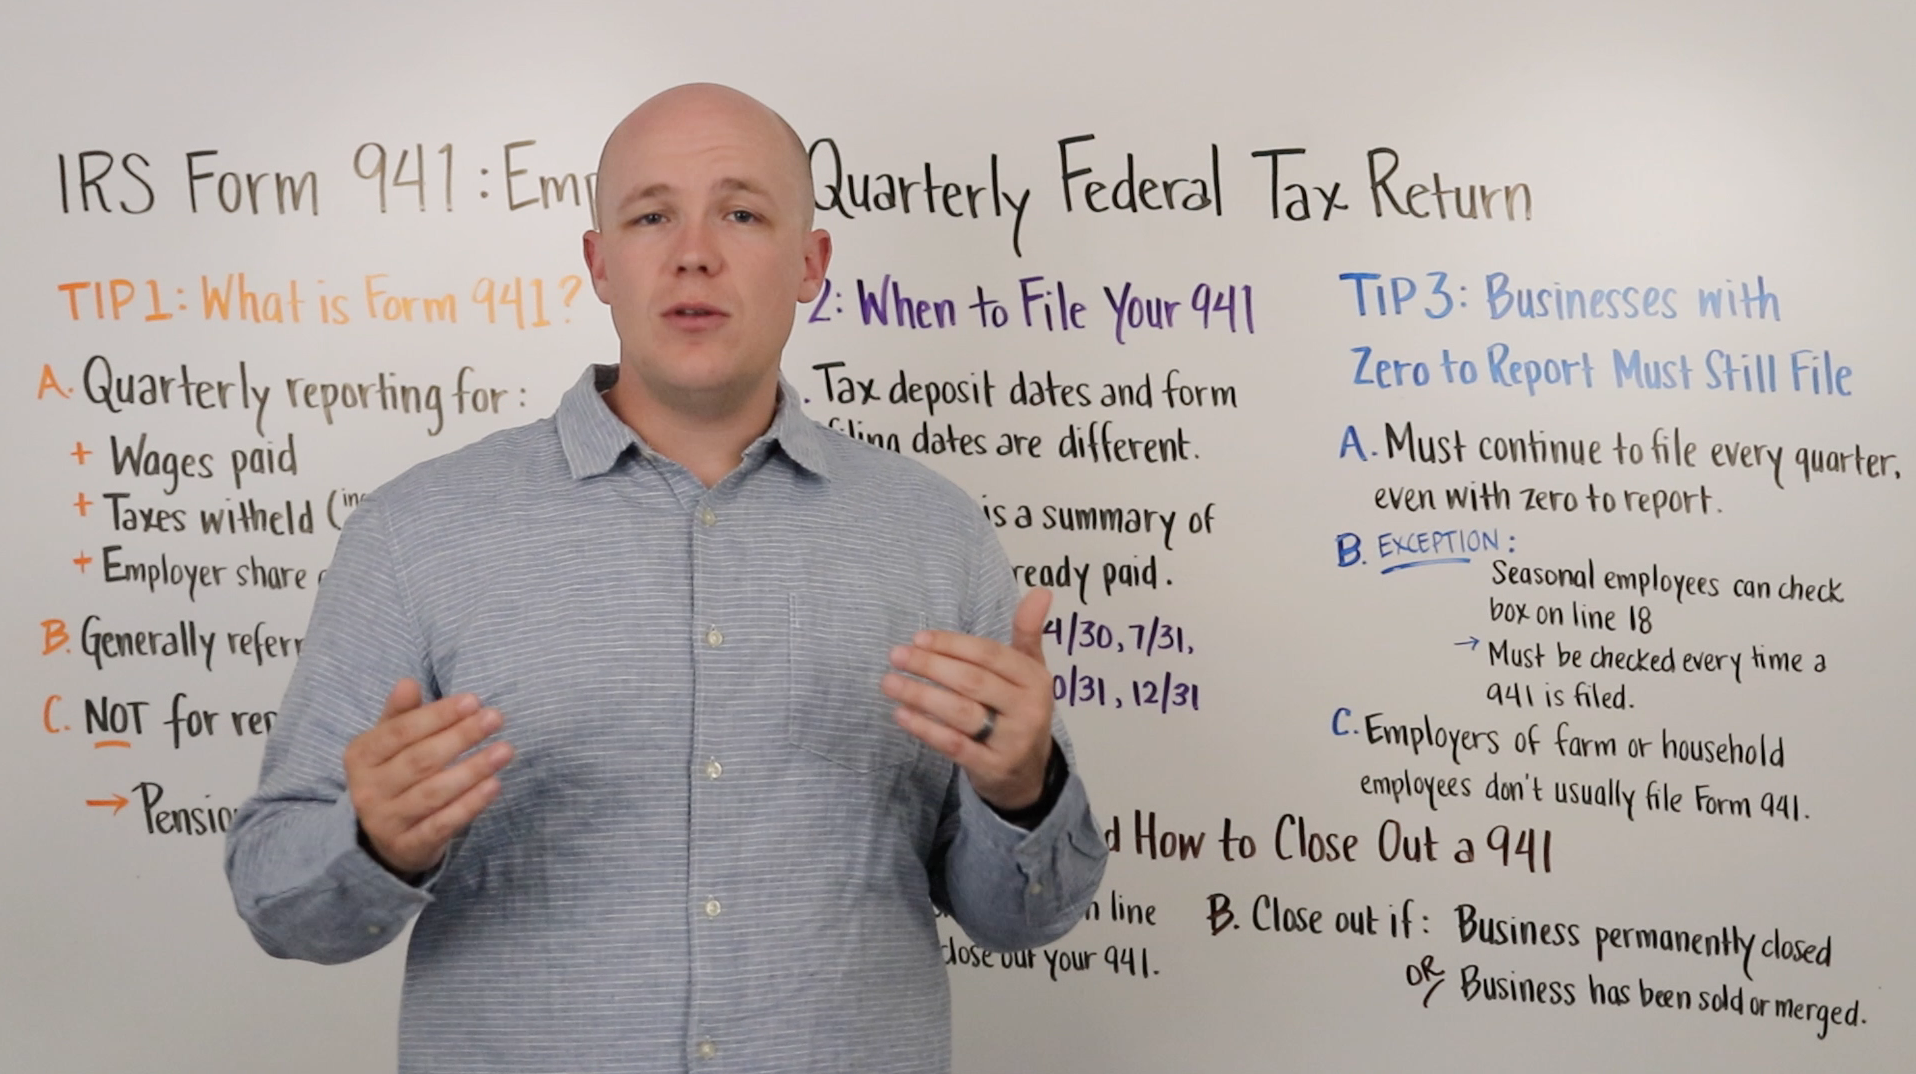 2021 Guide for Filling out IRS Form 941